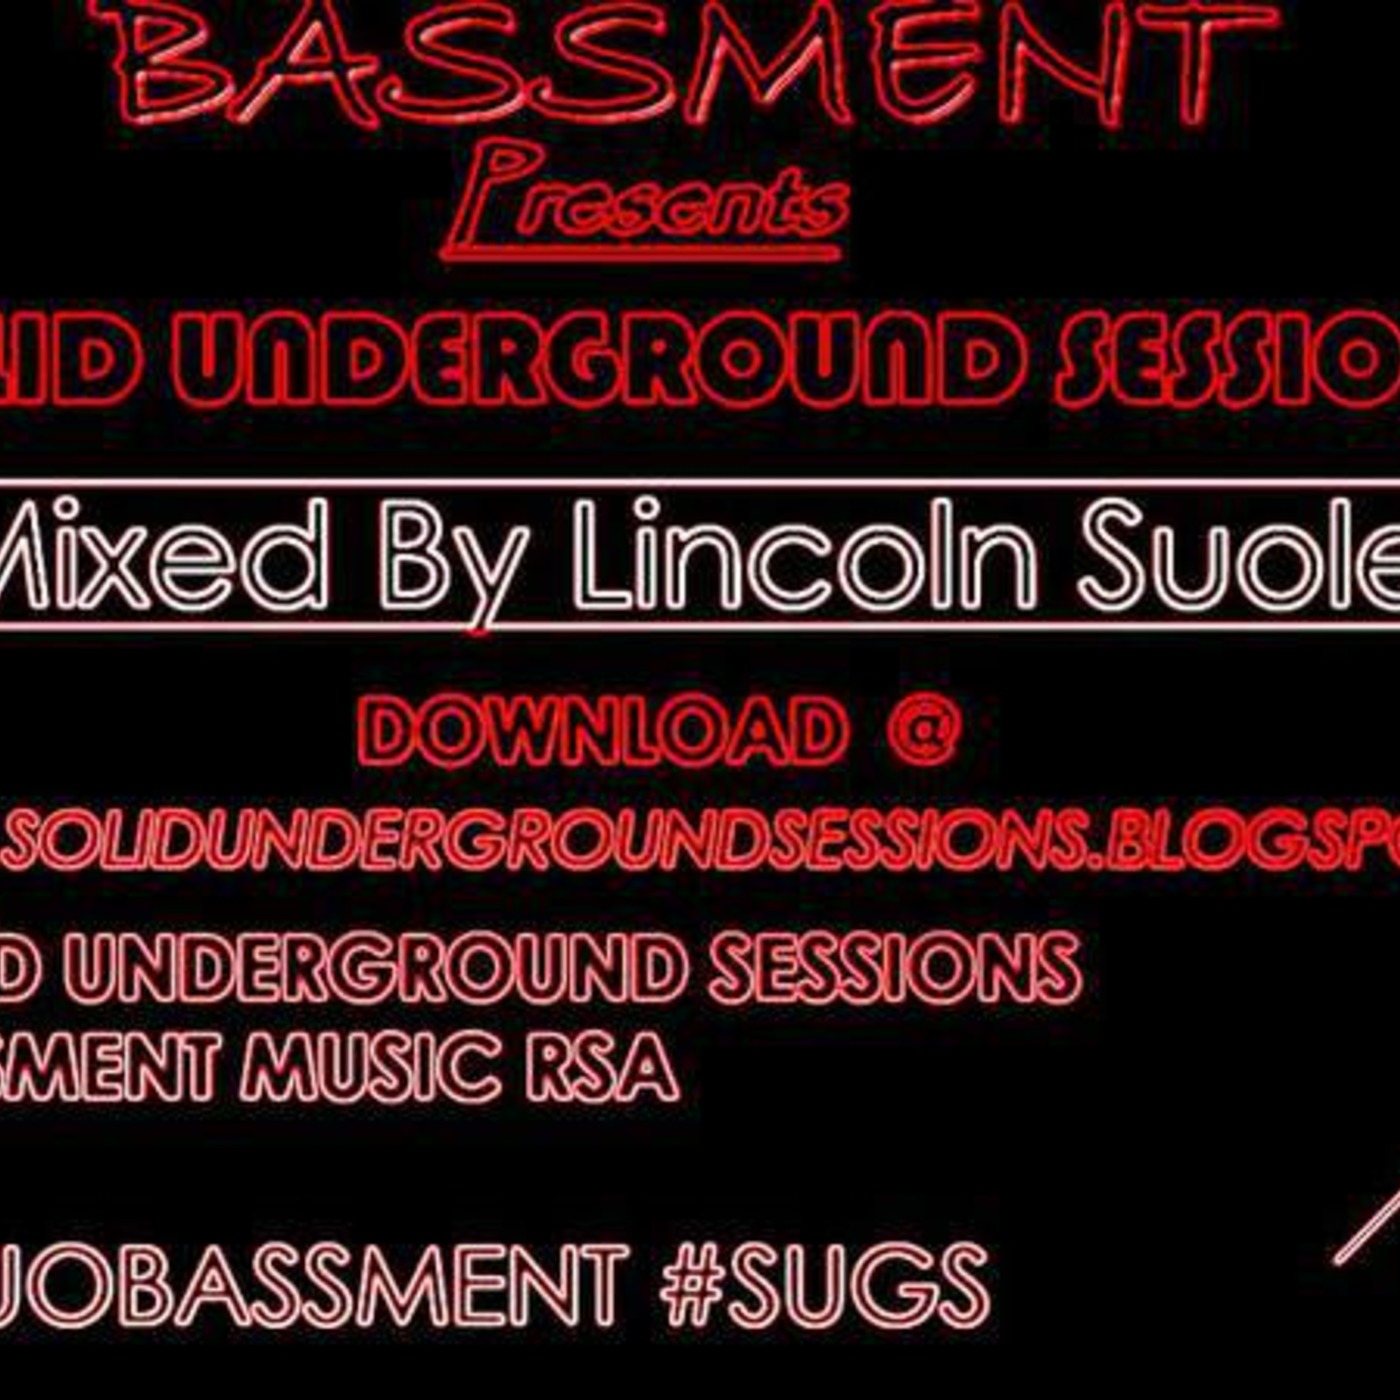 #8 Mixed By Lincoln Suole #SUGS